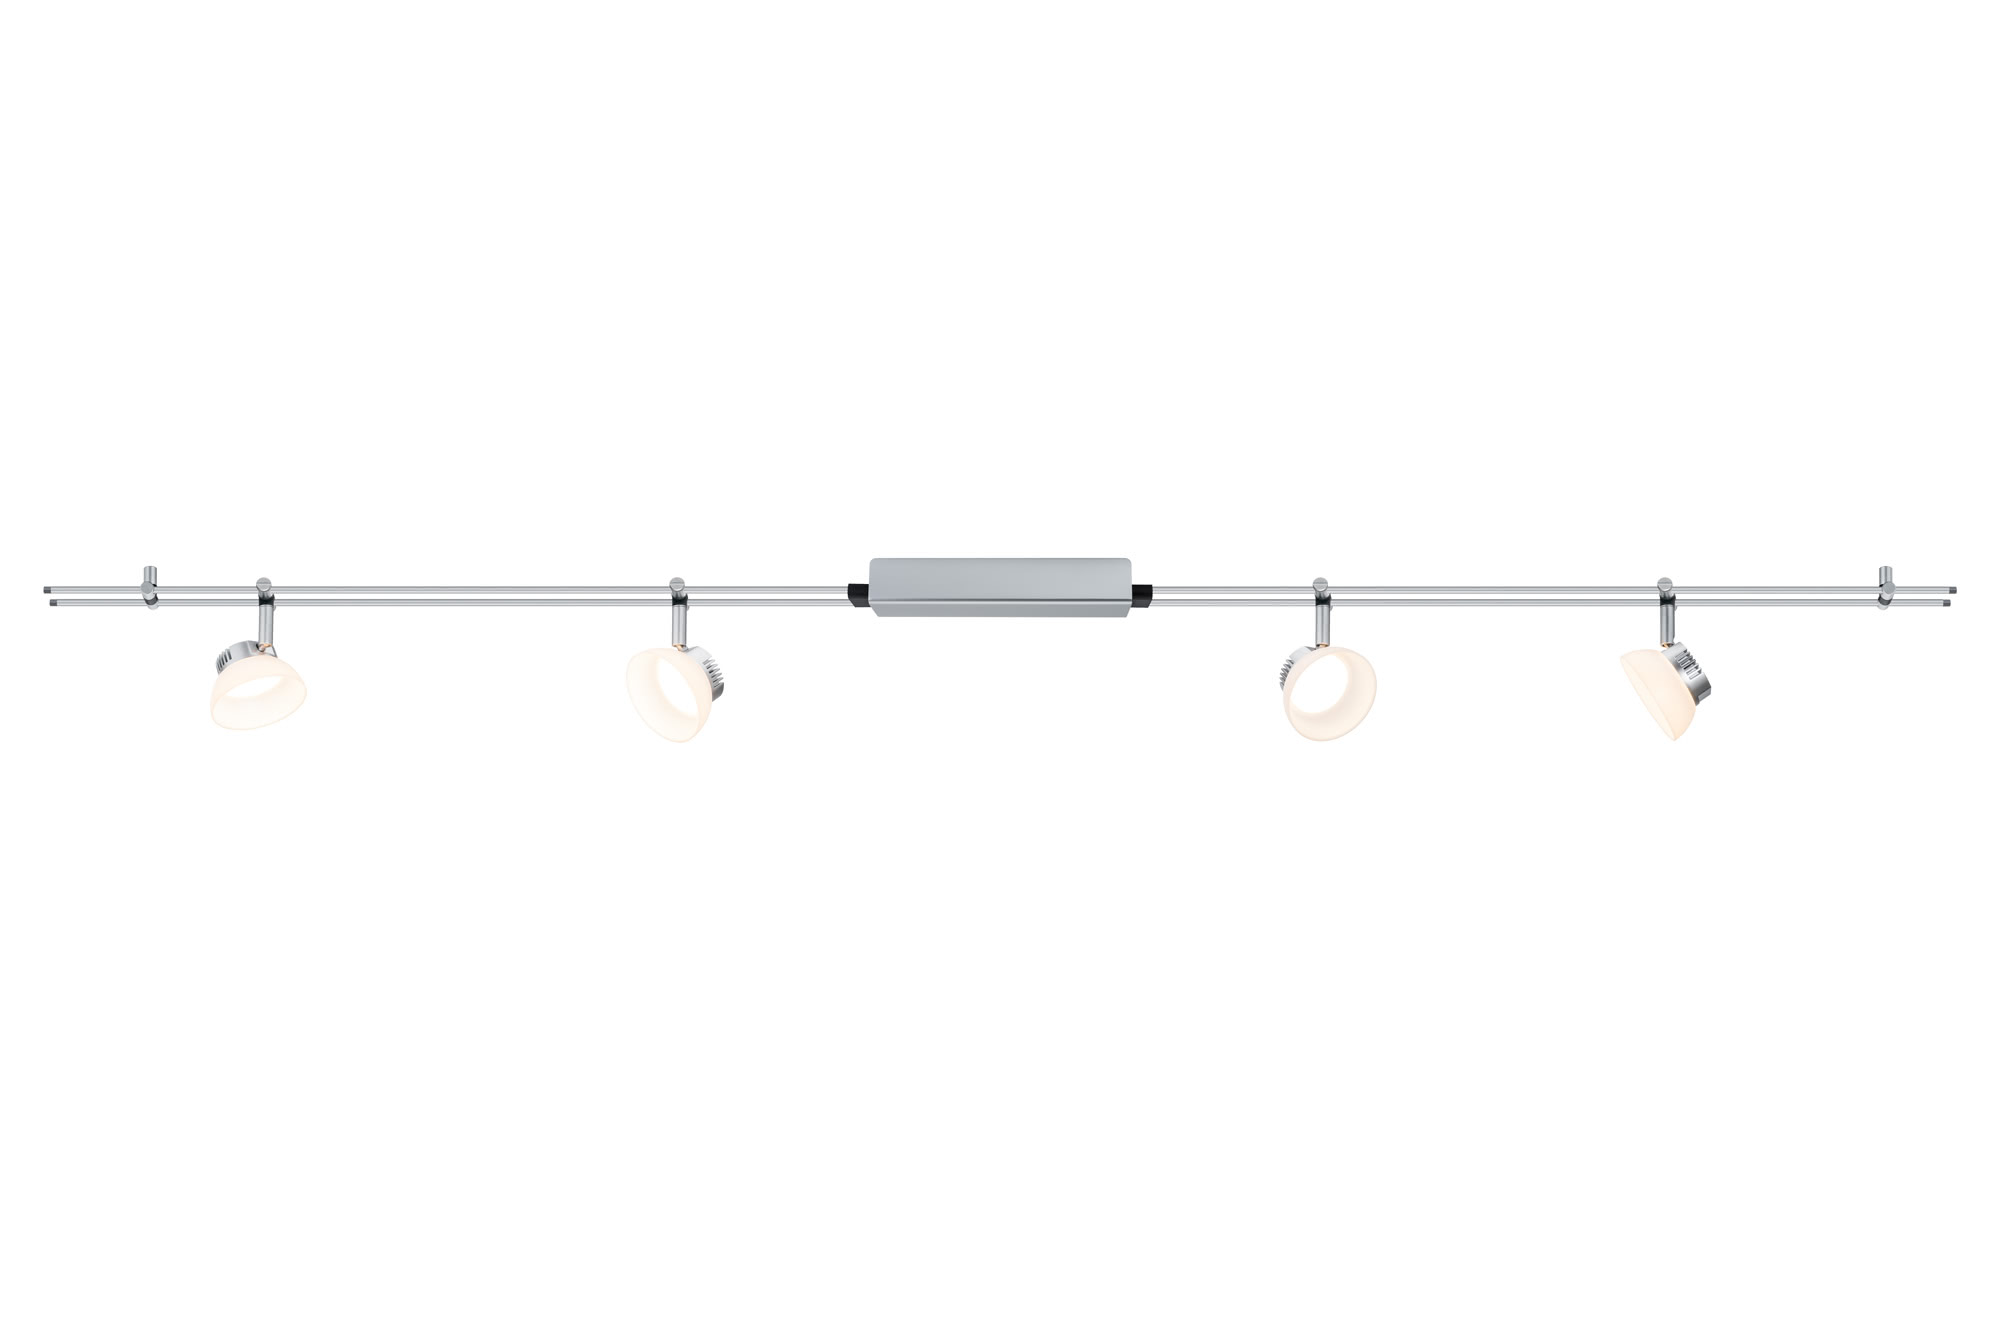 95194 RS DC Set GlassLED I 4x4W Chr-m 30VA IceLED, the 4-lamp 12В volt LED rail system with a total output of 16В W, impresses with its energy-saving 12 volt technology. The brilliant light creates a pleasant atmosphere in any living area. The system is suitable for wall and ceiling mounting. 951.94 Paulmann